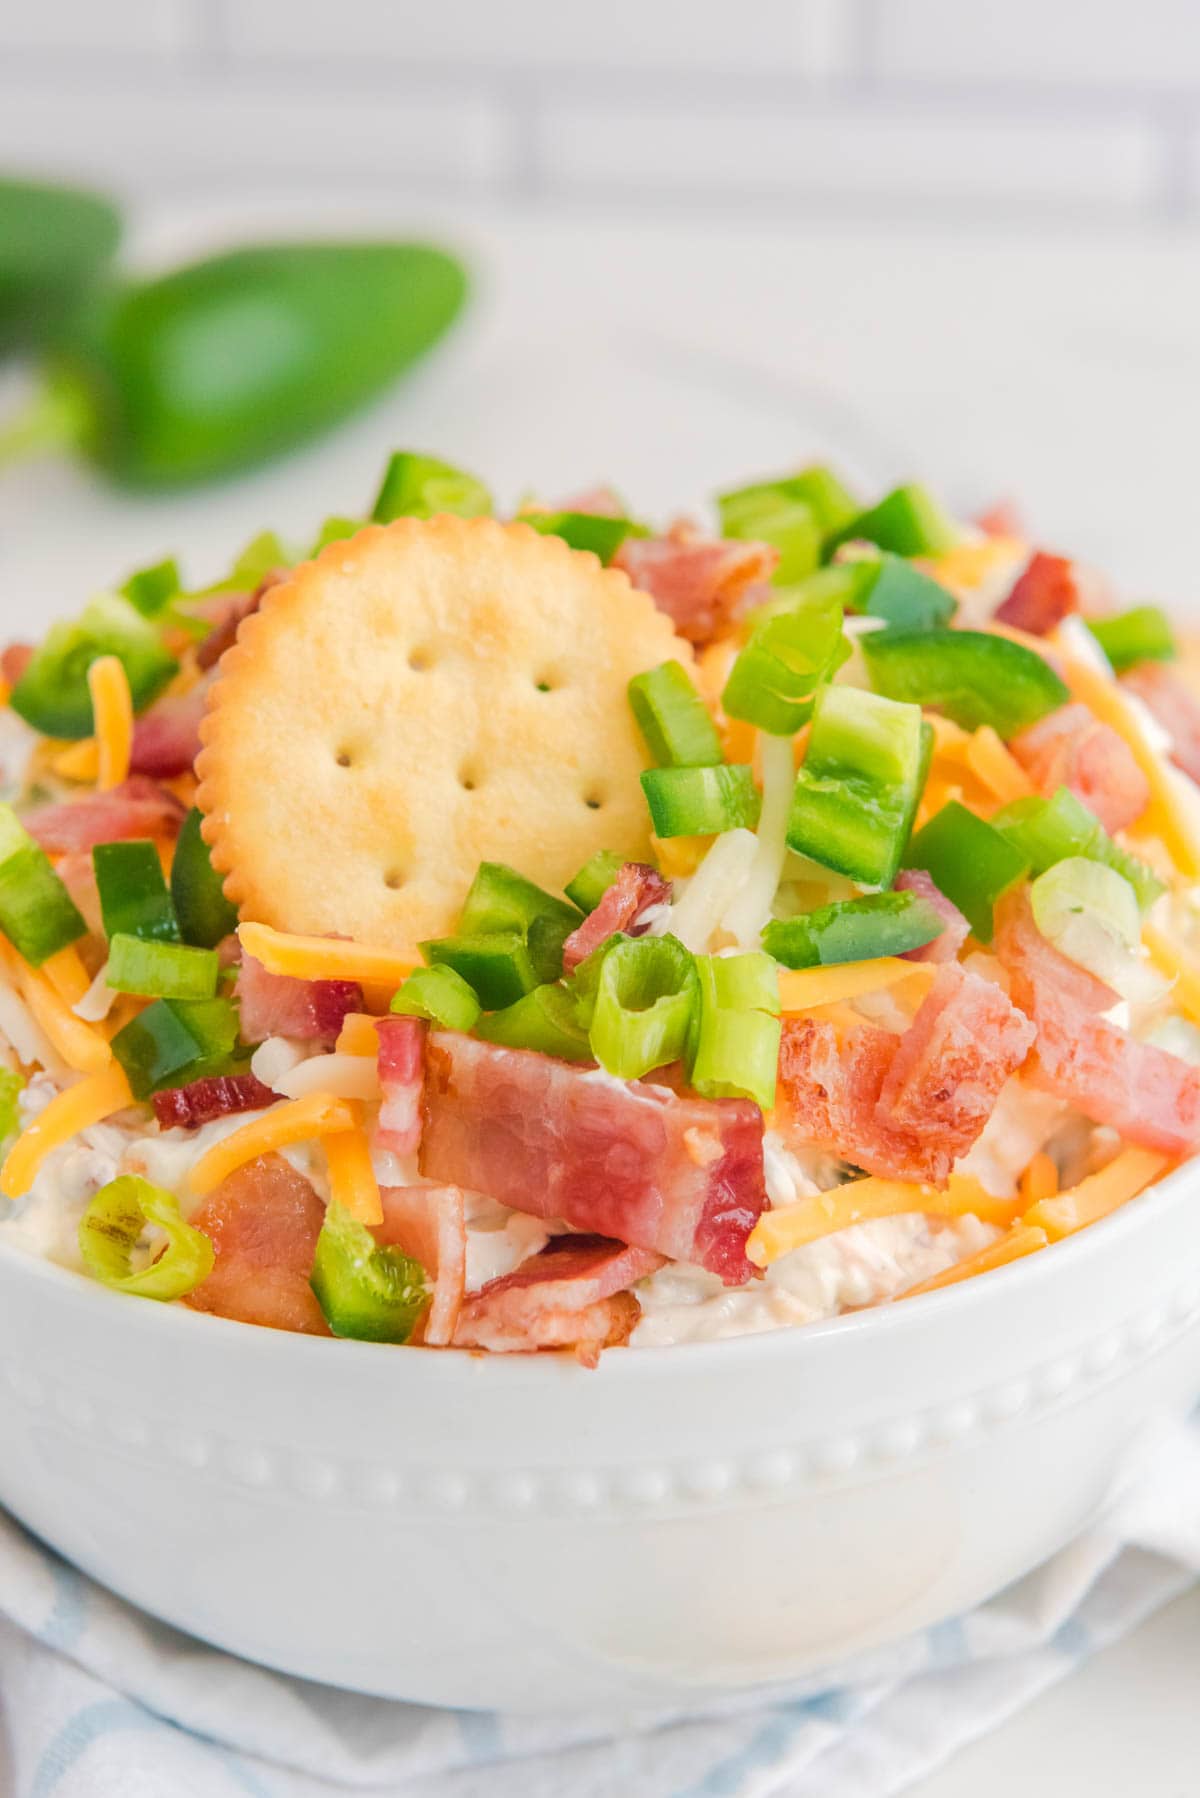 Jalapeno Popper dip with cracker